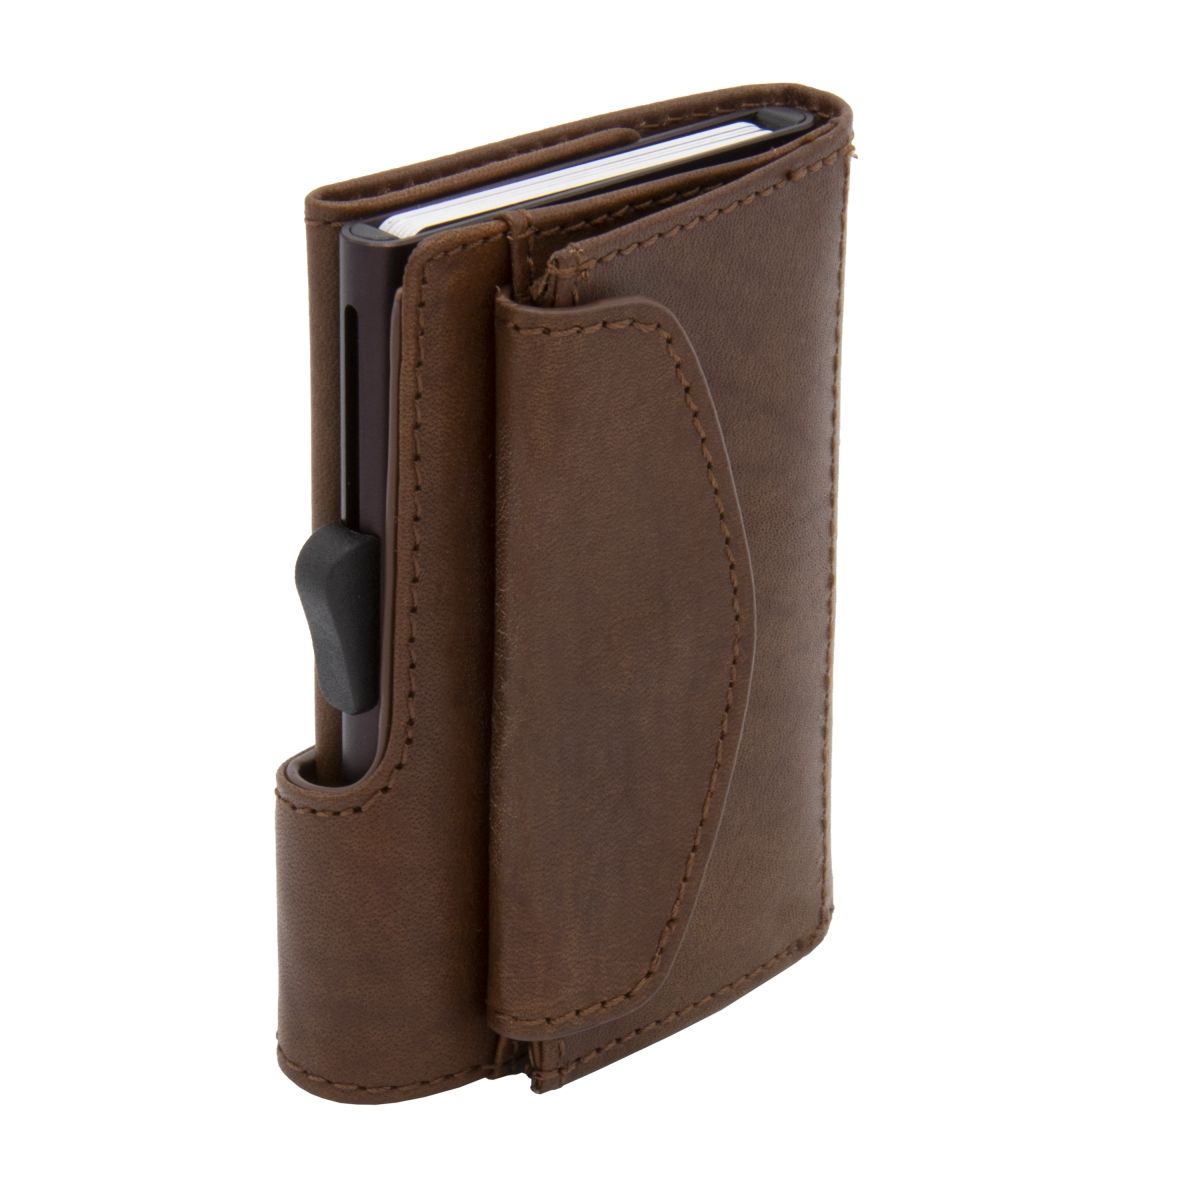 C-Secure Aluminum Card Holder with Genuine Leather and Coin Pouch - Brown